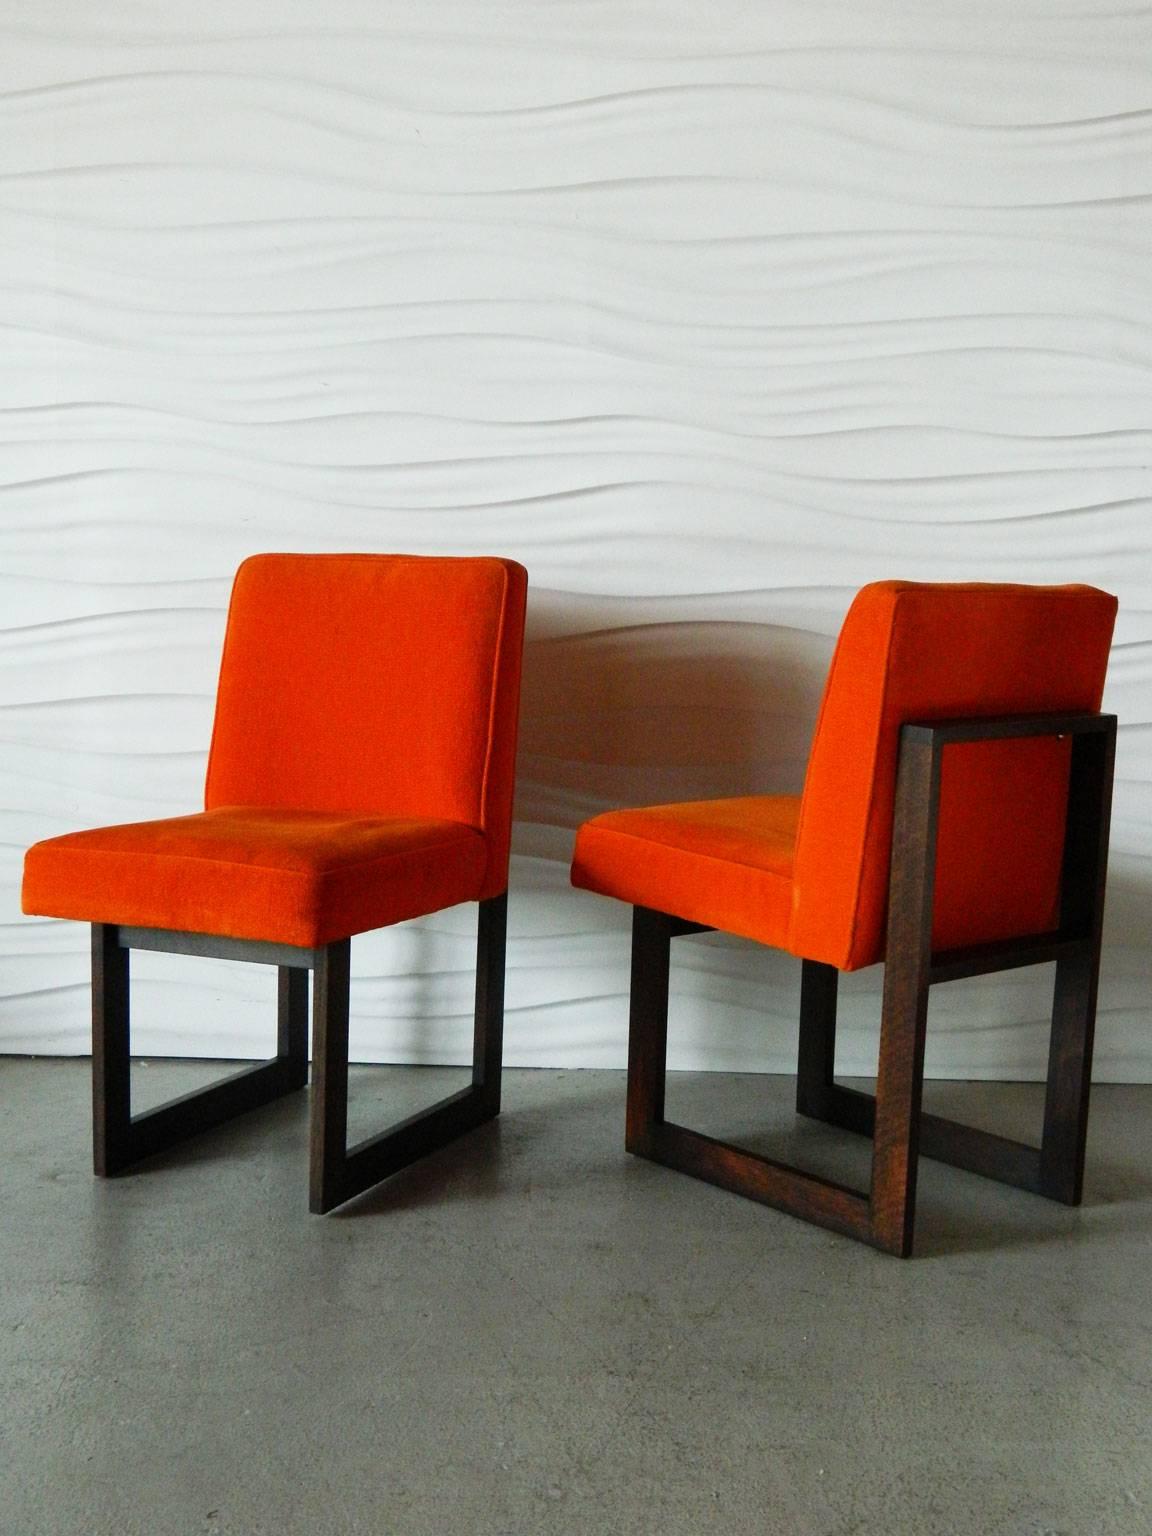 American Vladimir Kagan Cubist Dining Chairs For Sale